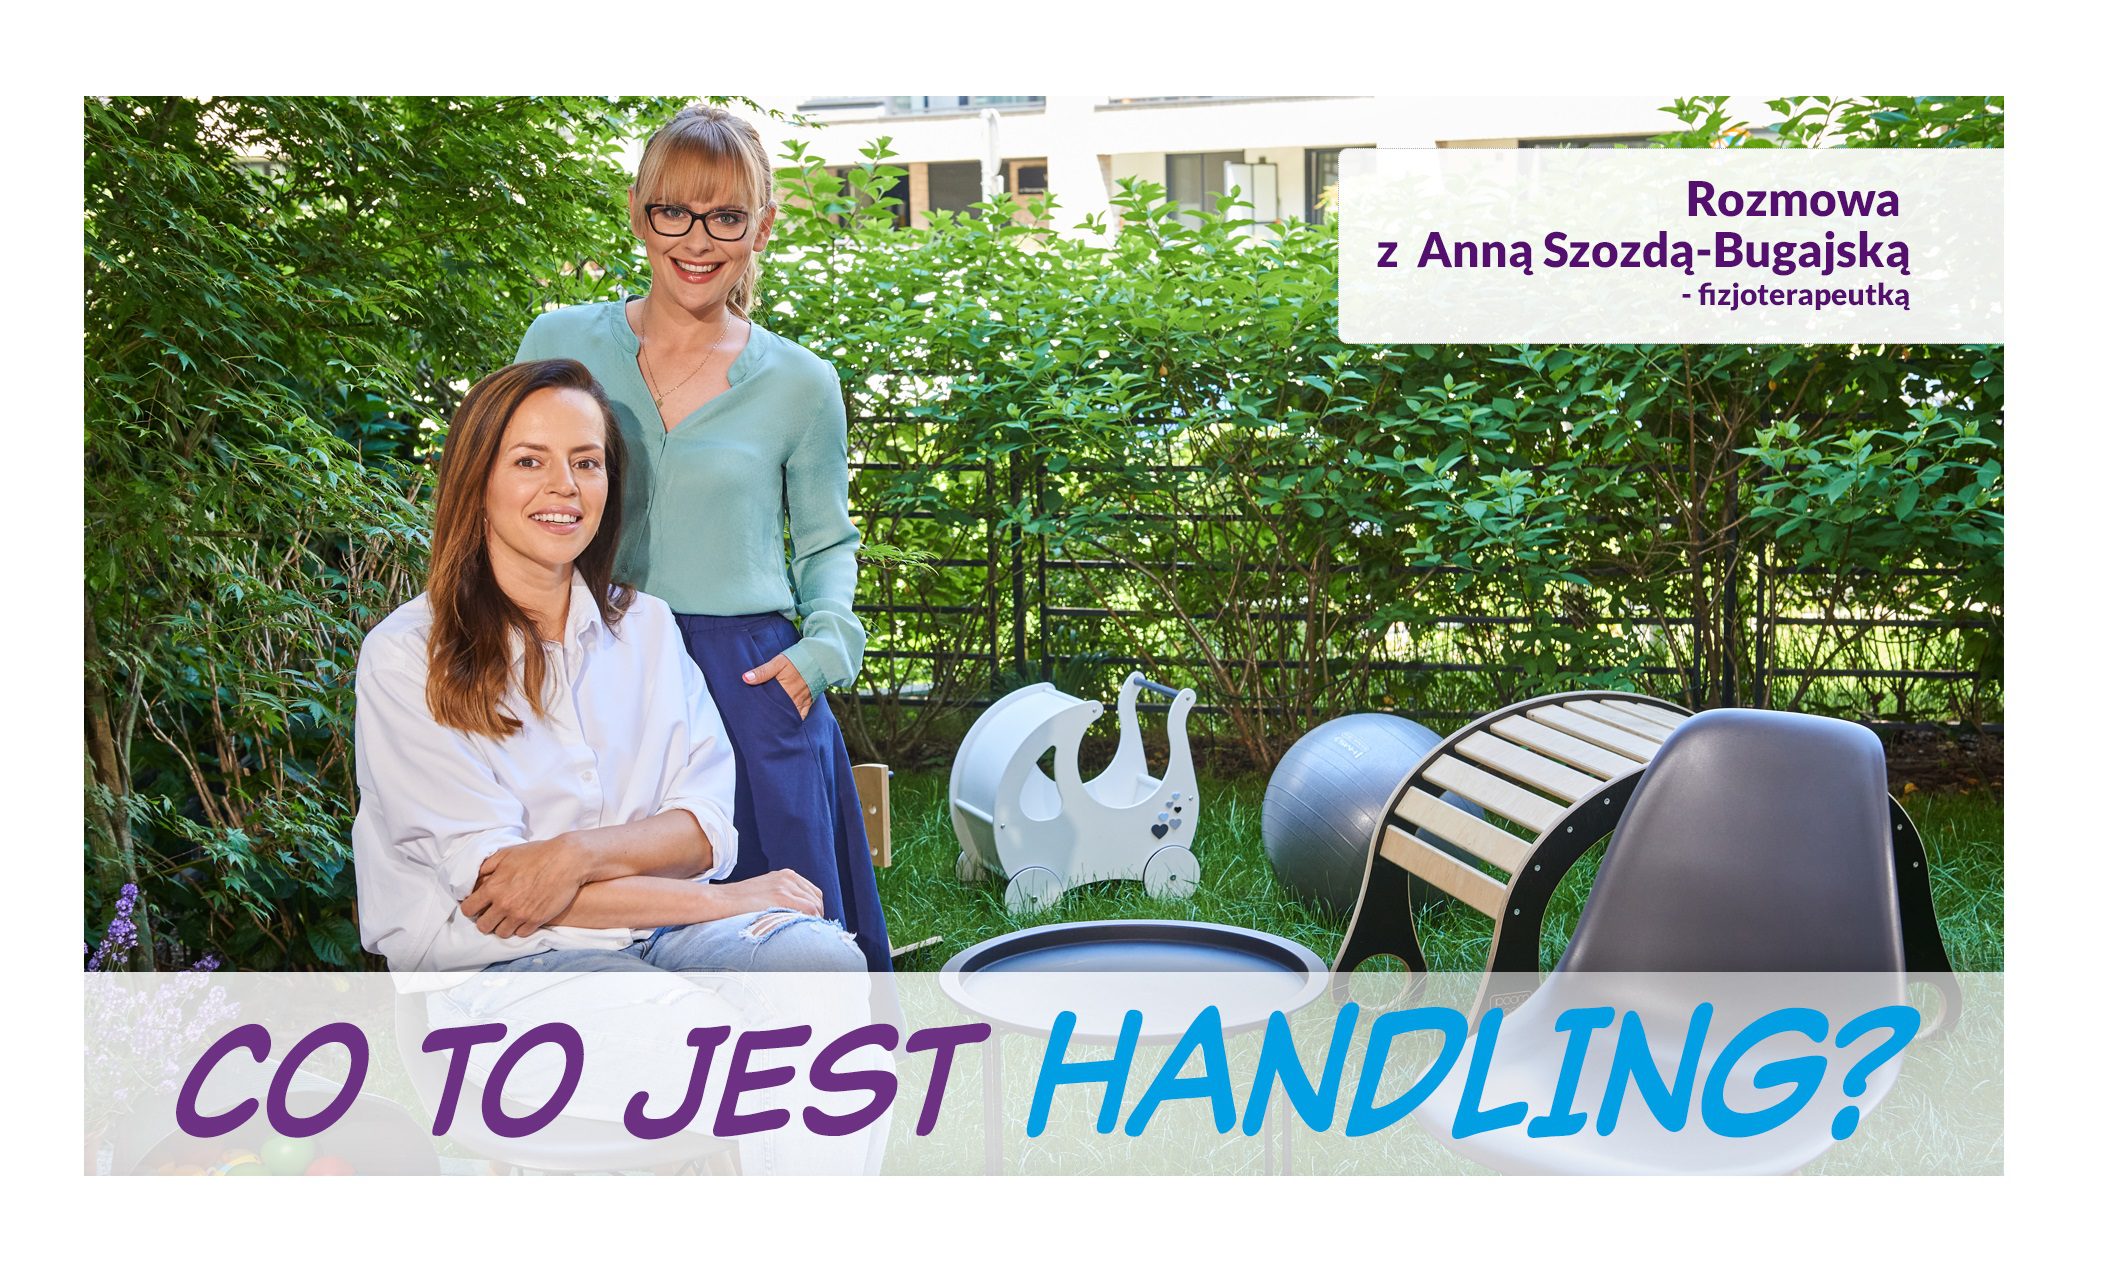 Co to jest Handling